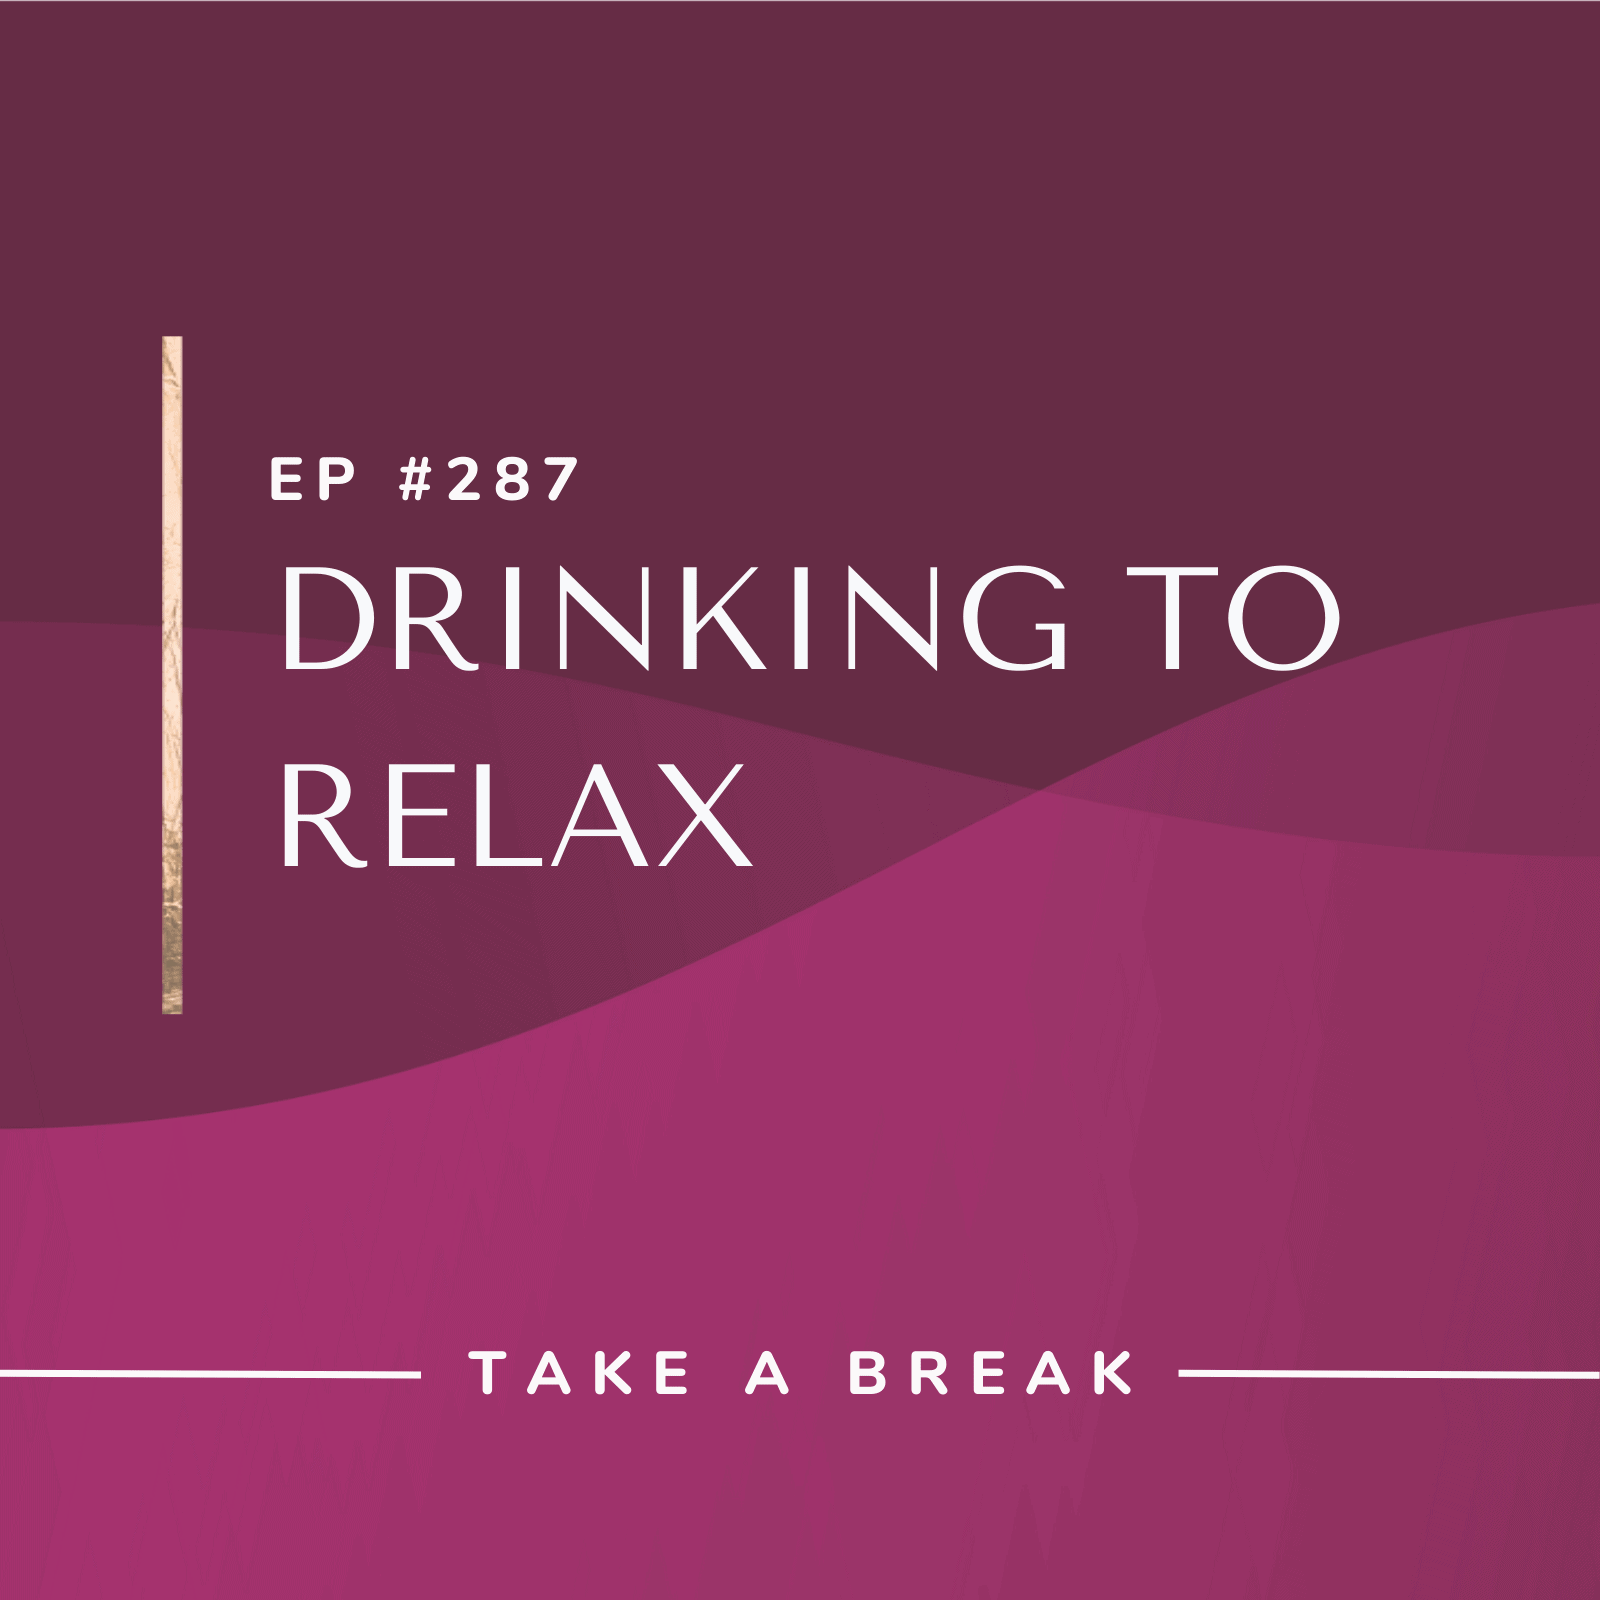 Take A Break from Drinking Drinking to Relax